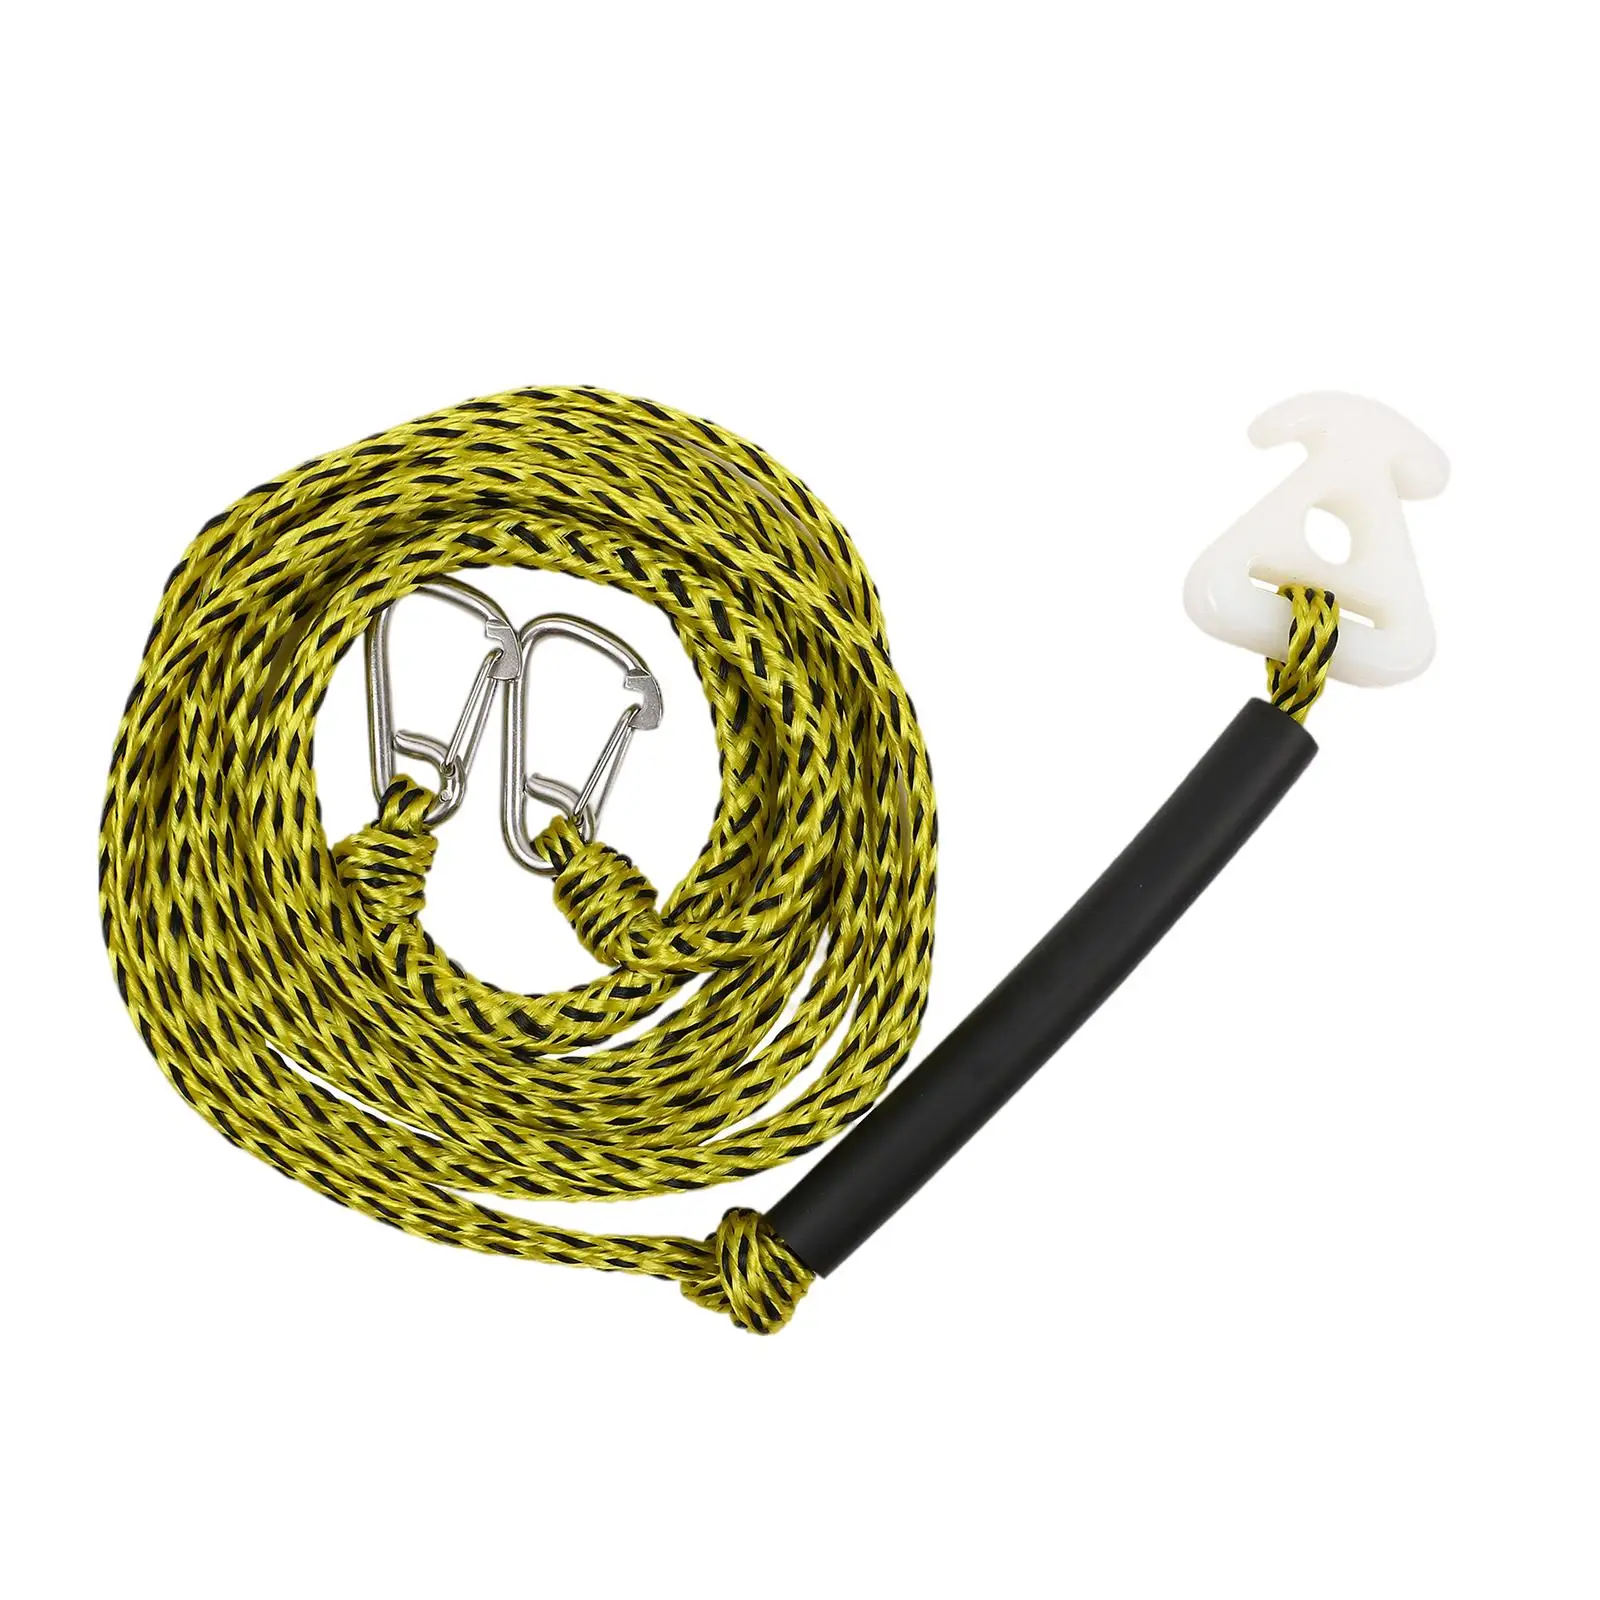 Pulley Tow Harness Watersports Rope 17ft Waakeboarding Tubing Wake Boarding Pulling Rope Water Sport Lines Accessories